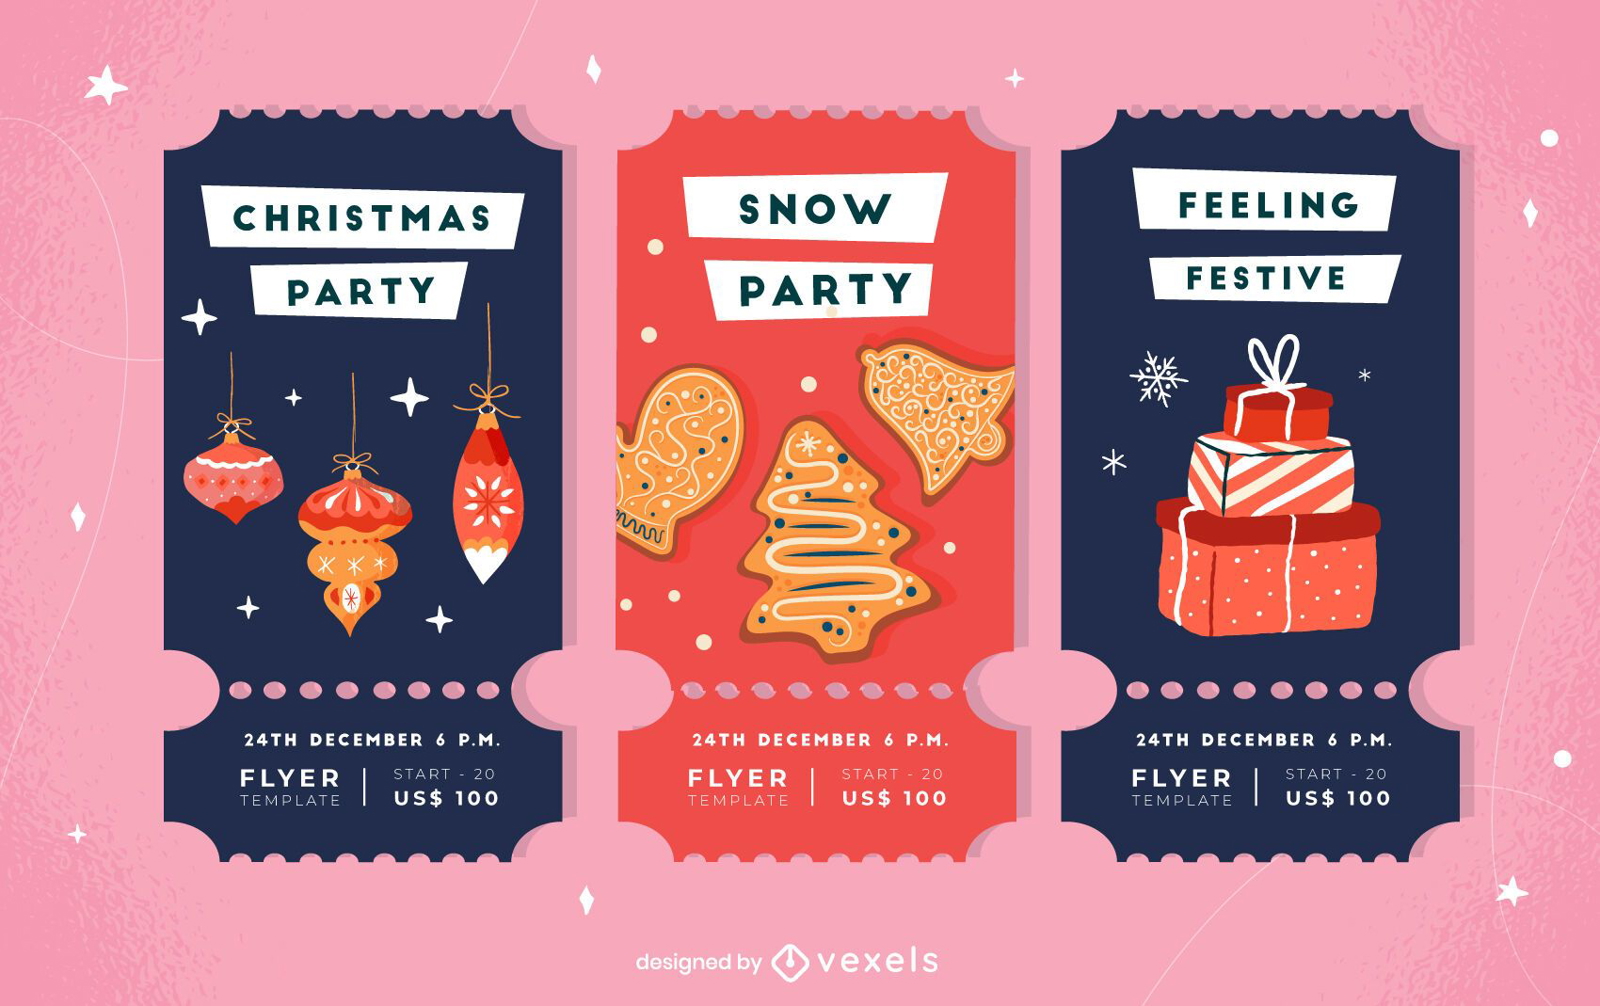 Christmas Party Ticket Invitiation Pack Vector Download